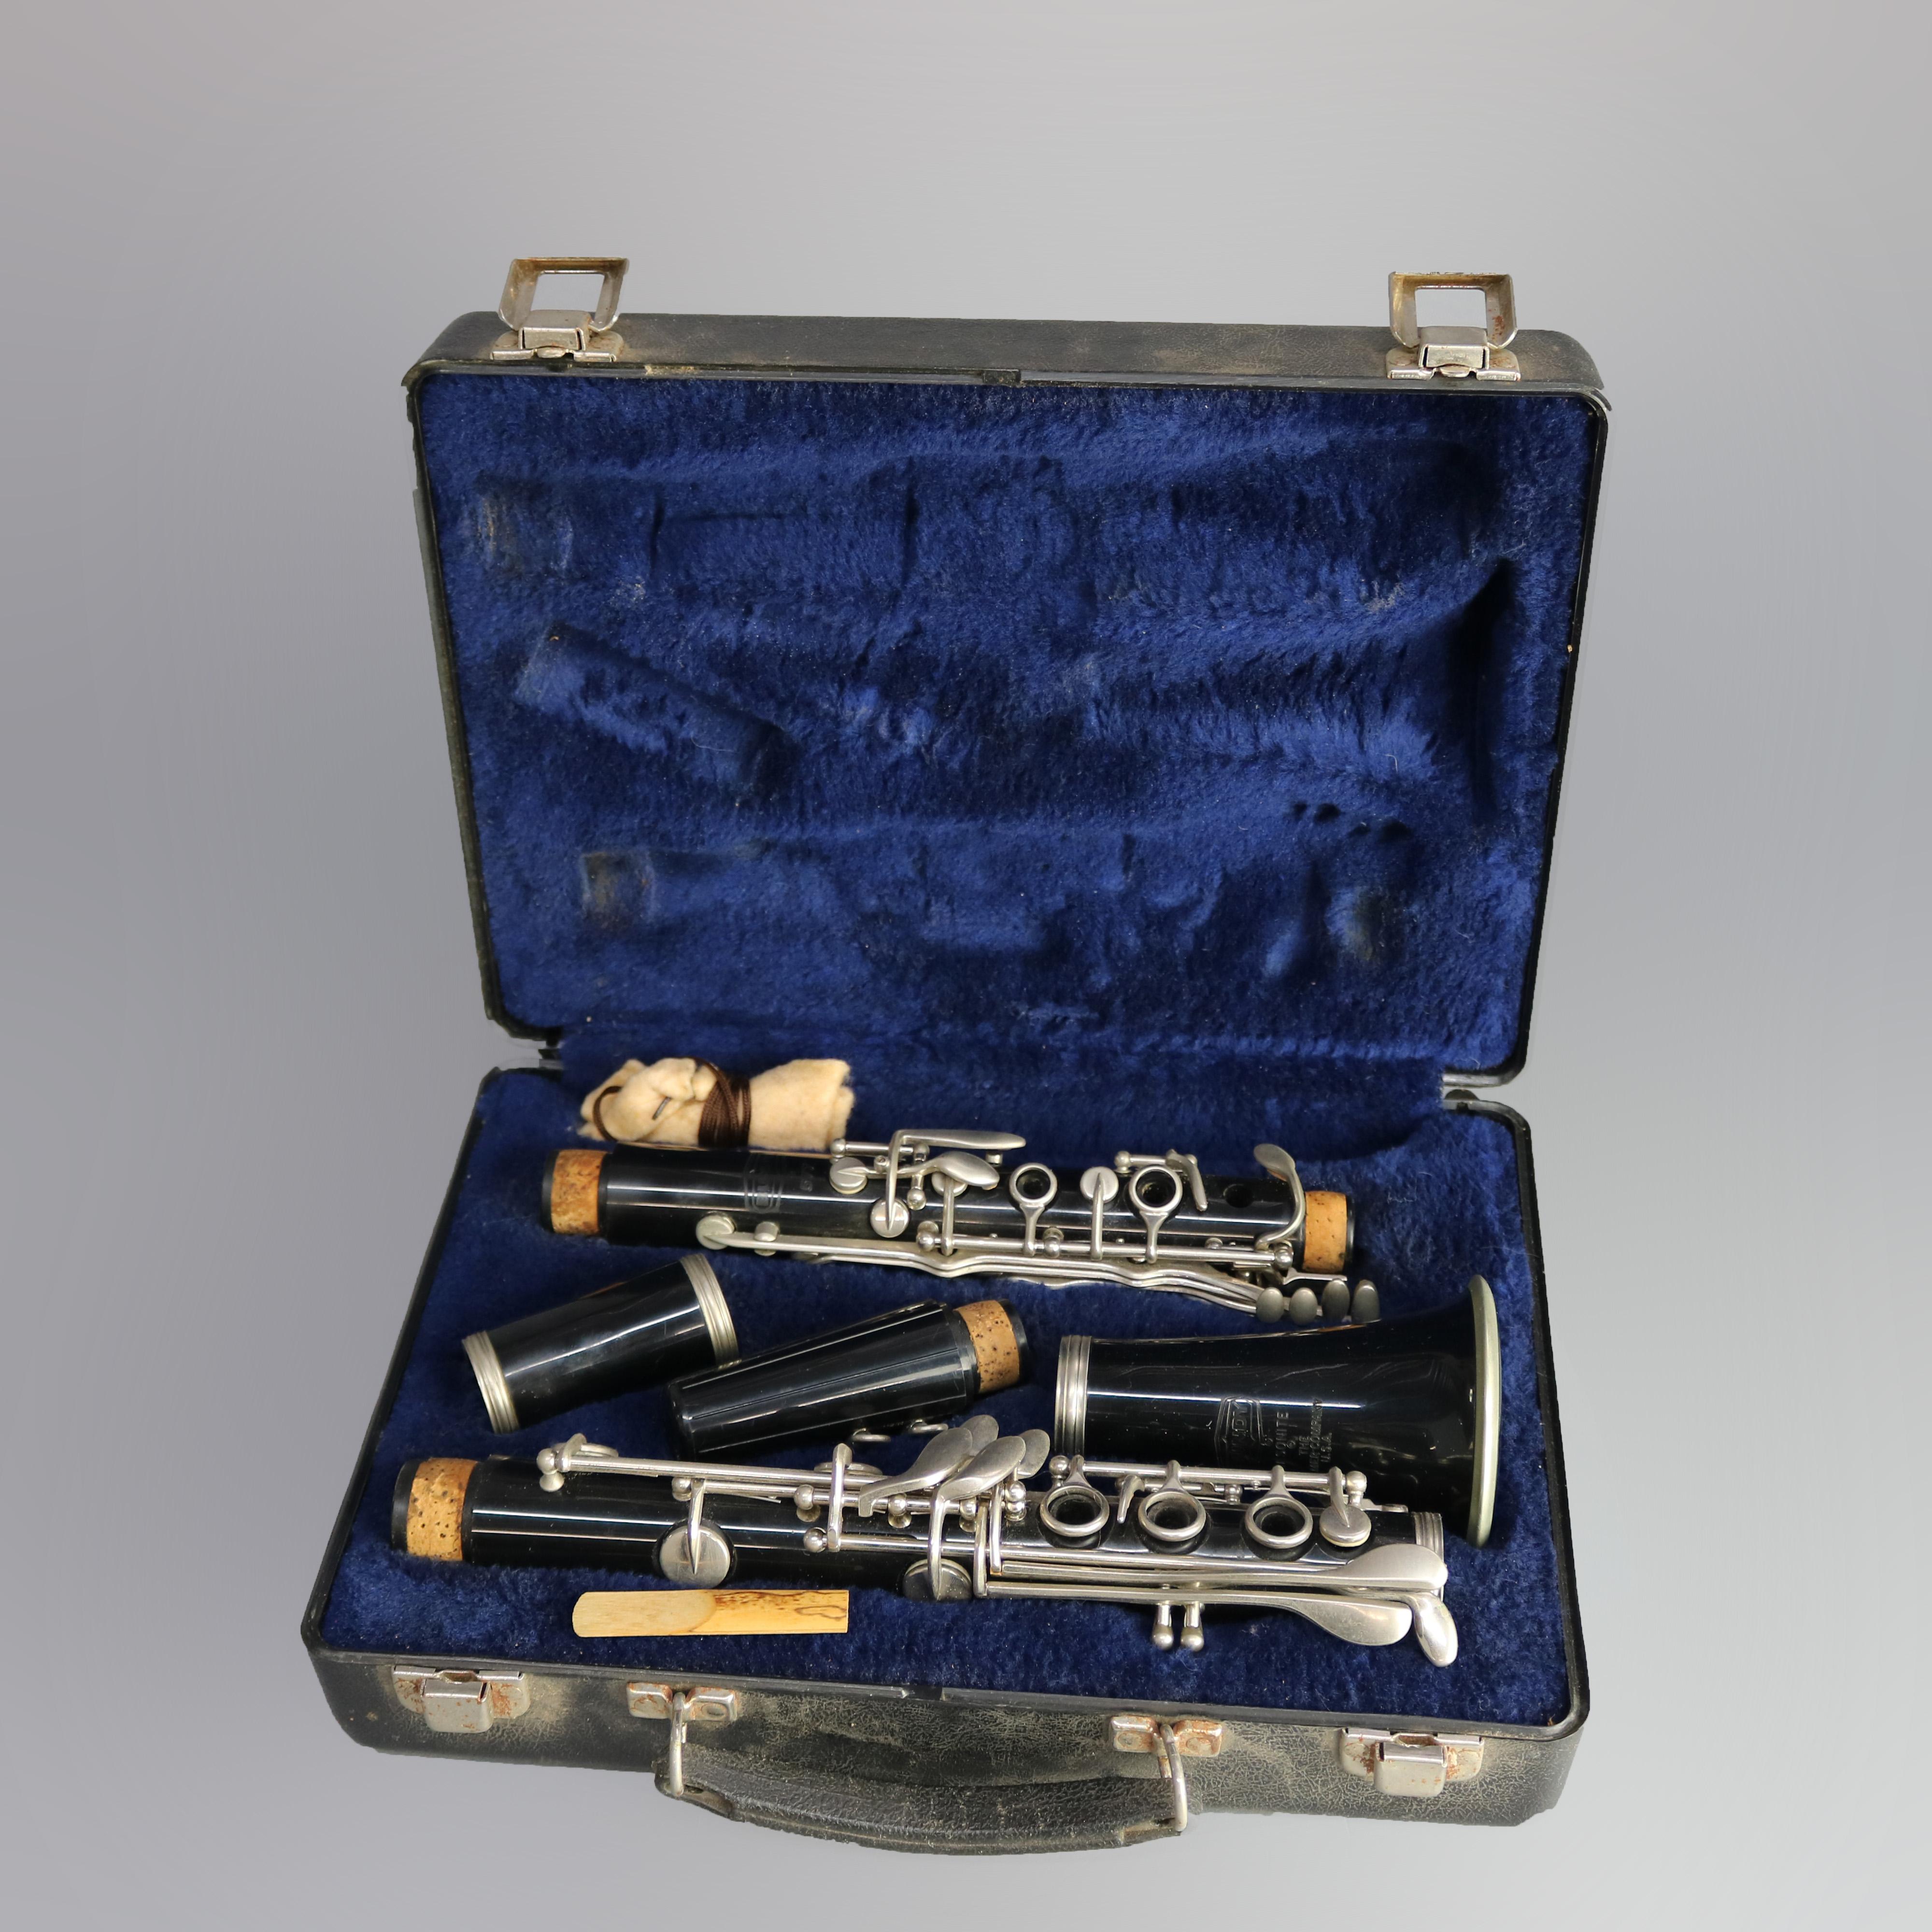 A vintage Selmer Bundy Resonite ebonized clarinet with nickel plated keys and accompanying case, Selmer Bundy, 20th century

Measures: Instrument 26.75